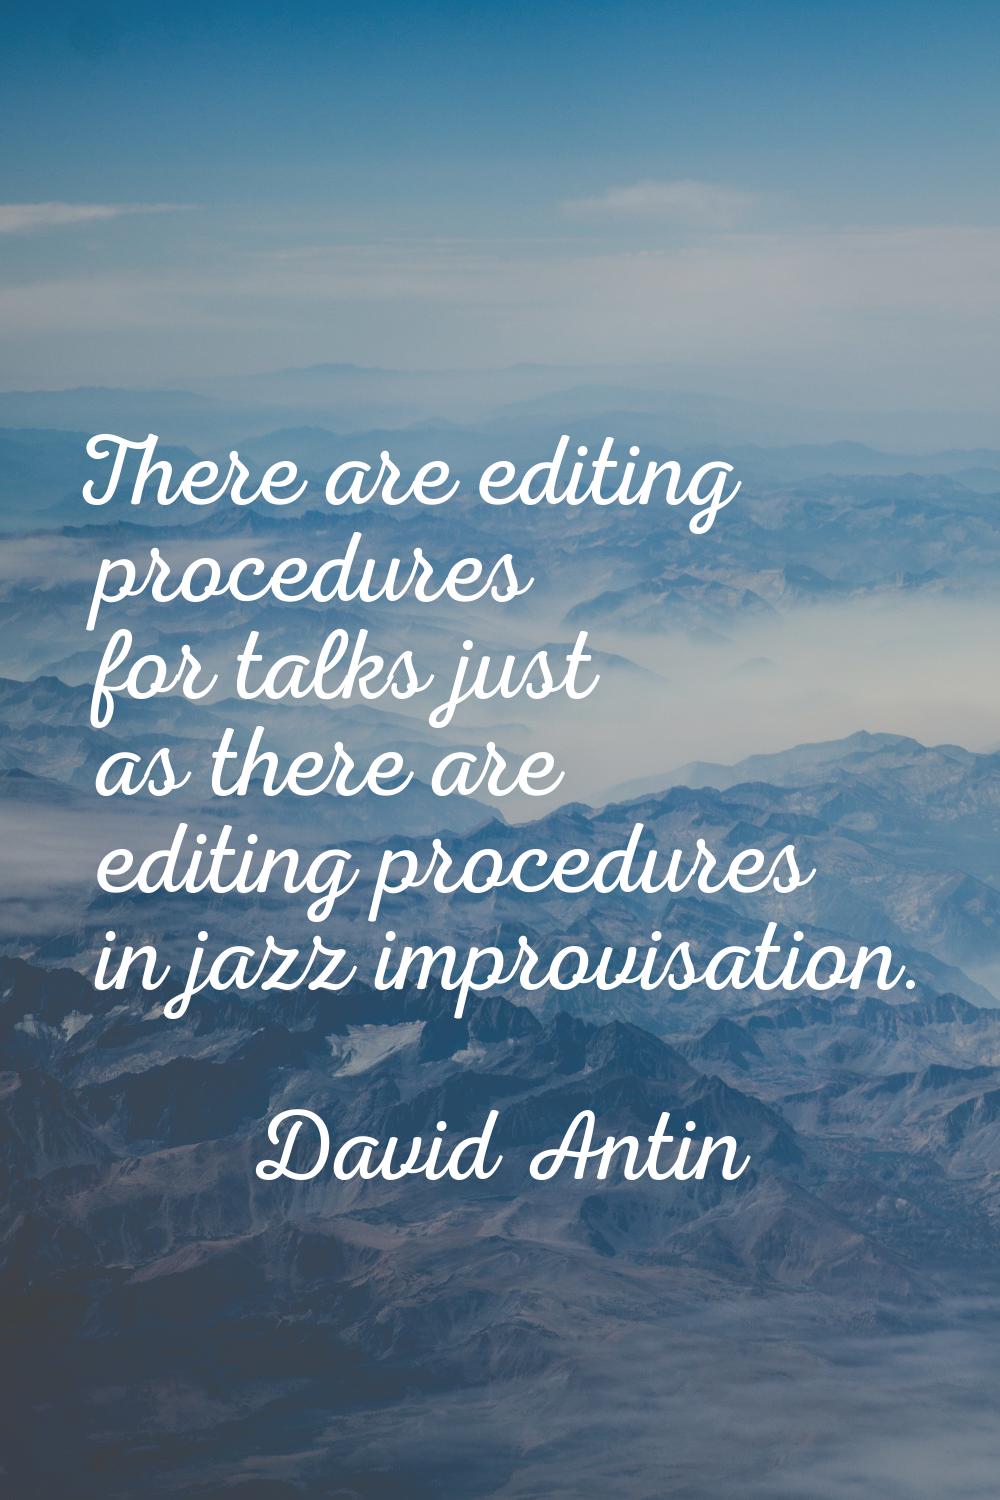 There are editing procedures for talks just as there are editing procedures in jazz improvisation.